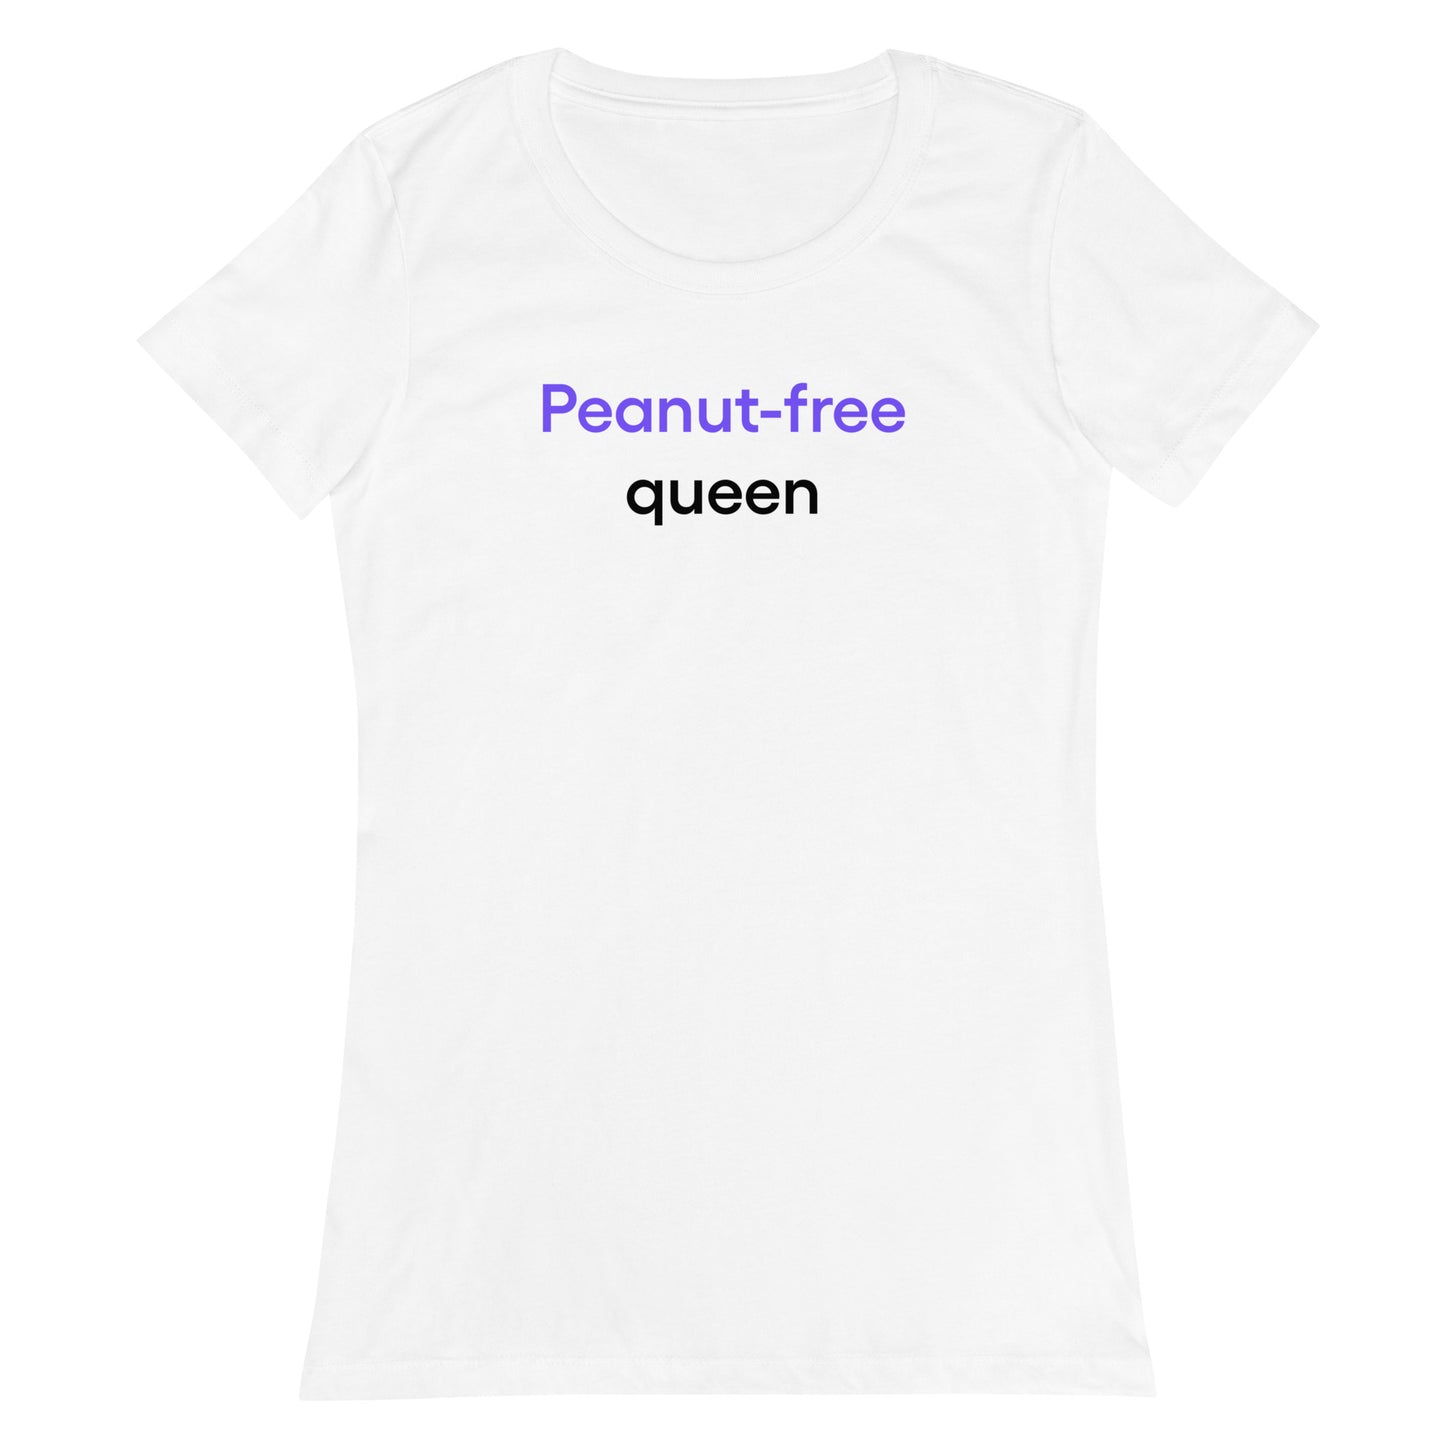 Peanut-free queen | Women’s fitted t-shirt